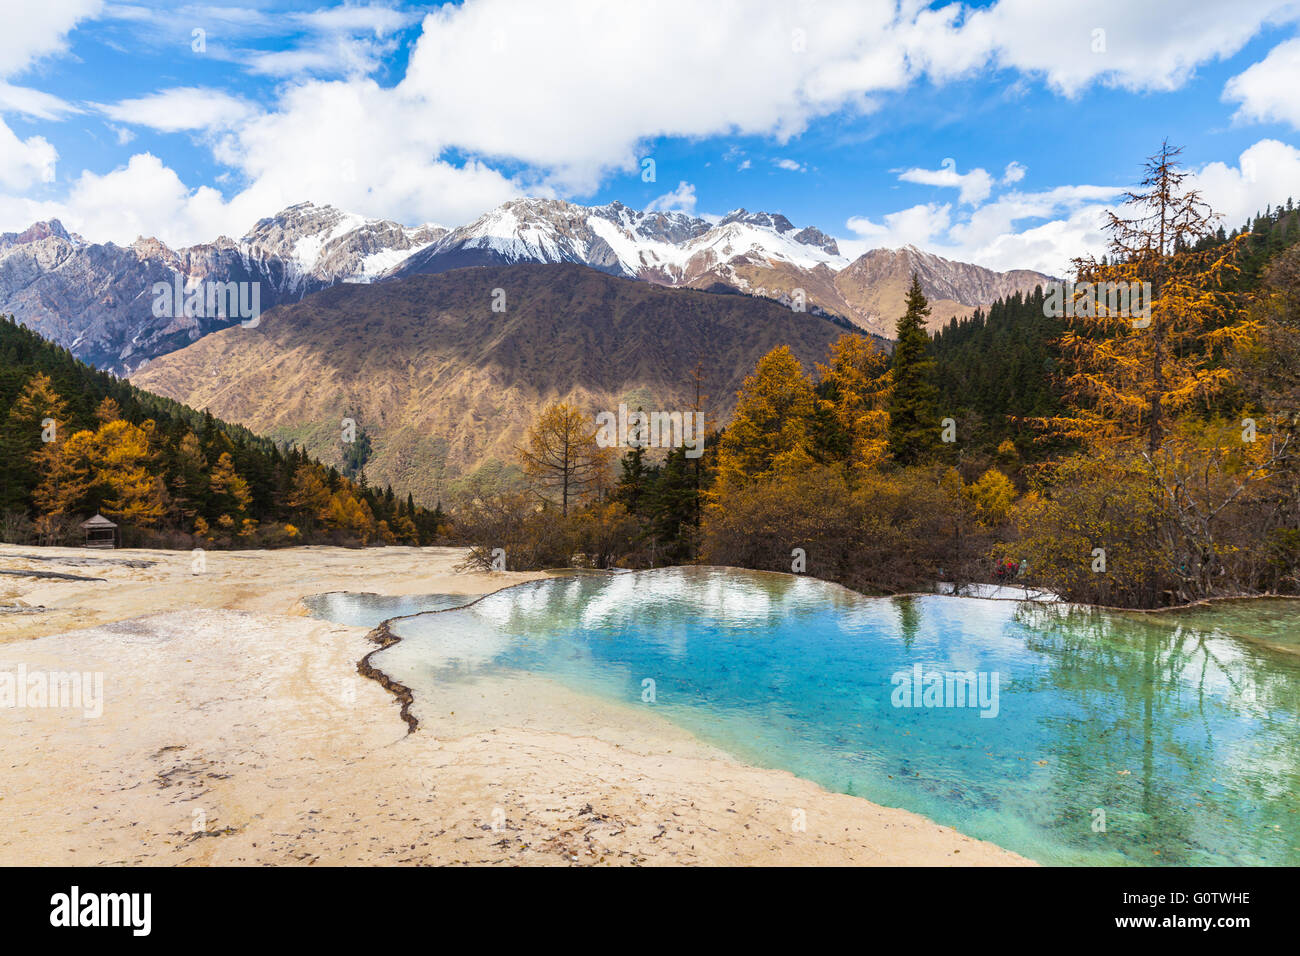 View of the ponds in Huanglong national park in Sichuan province, China Stock Photo